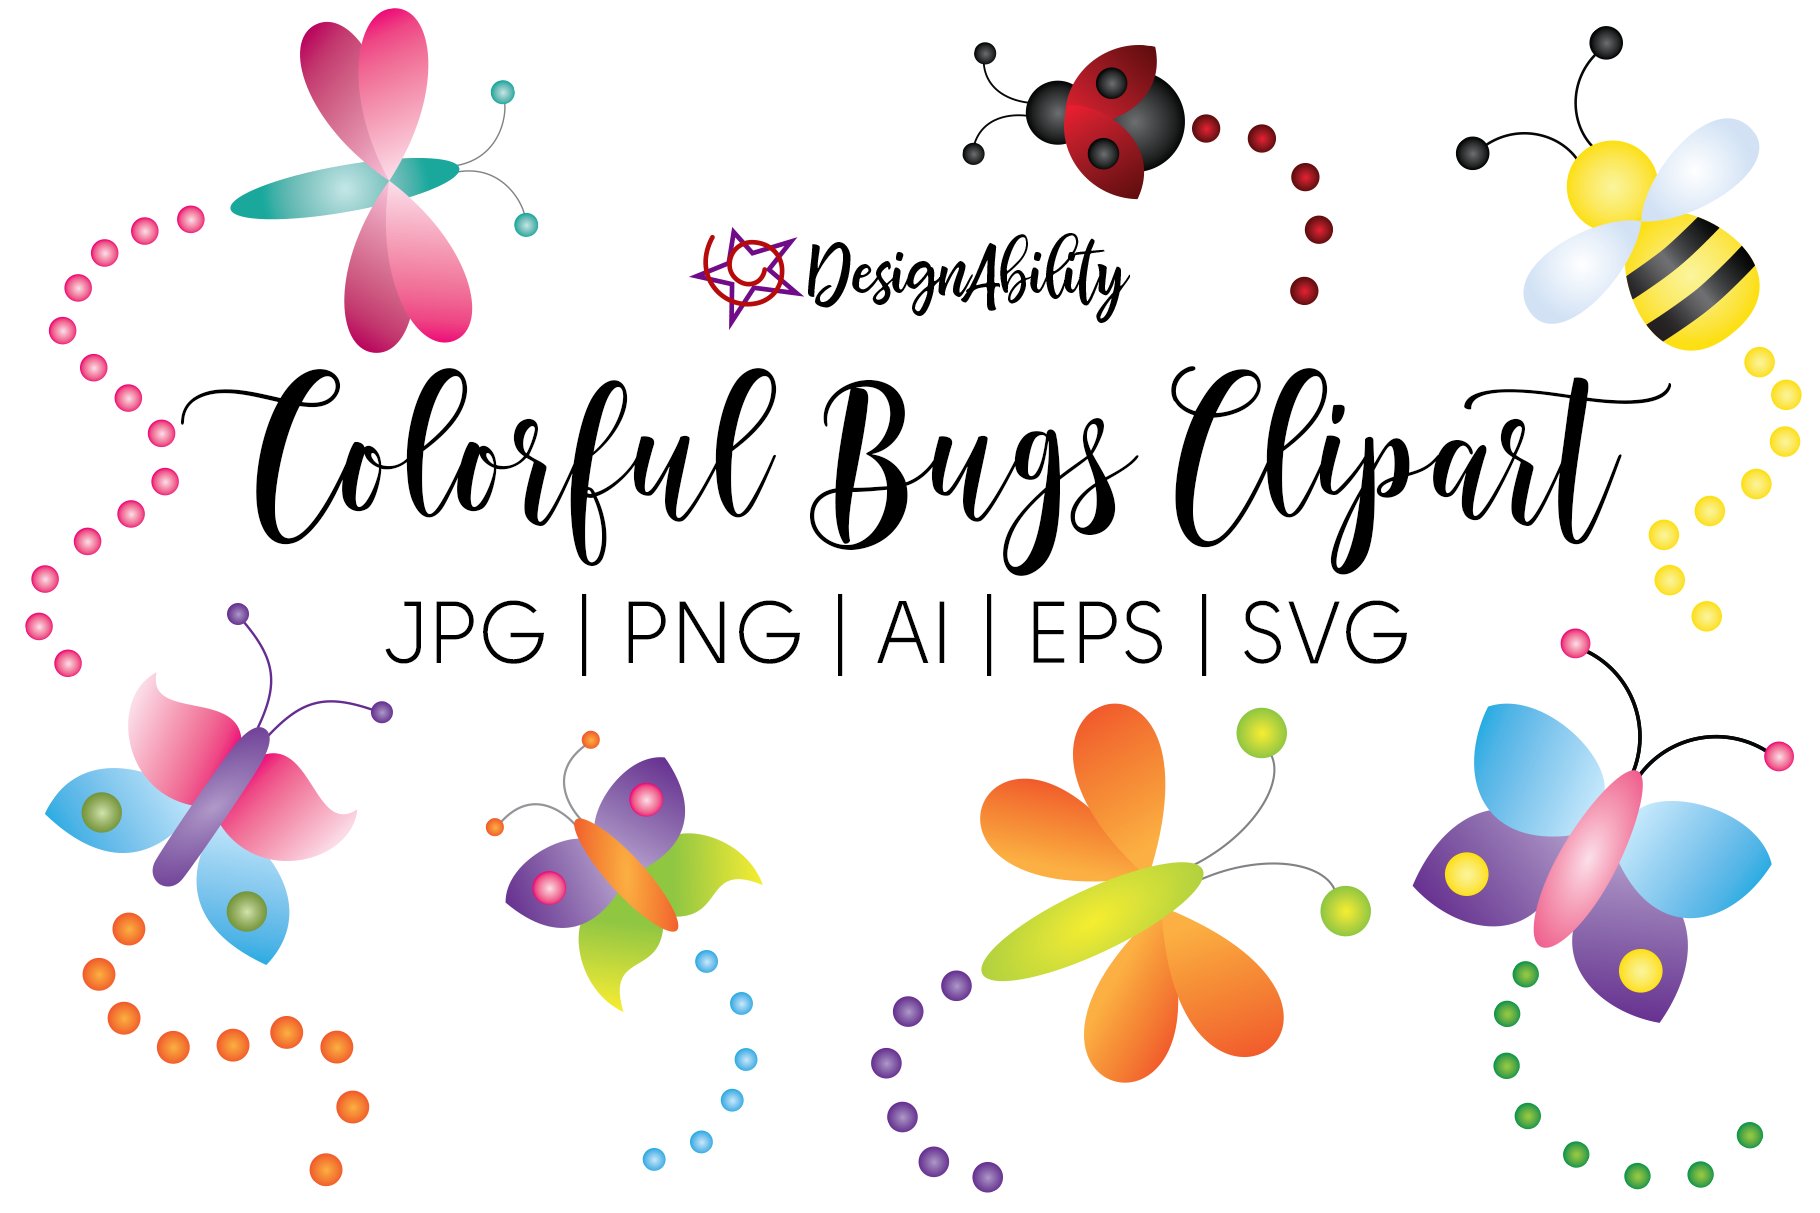 Colorful Bugs Clipart cover image.